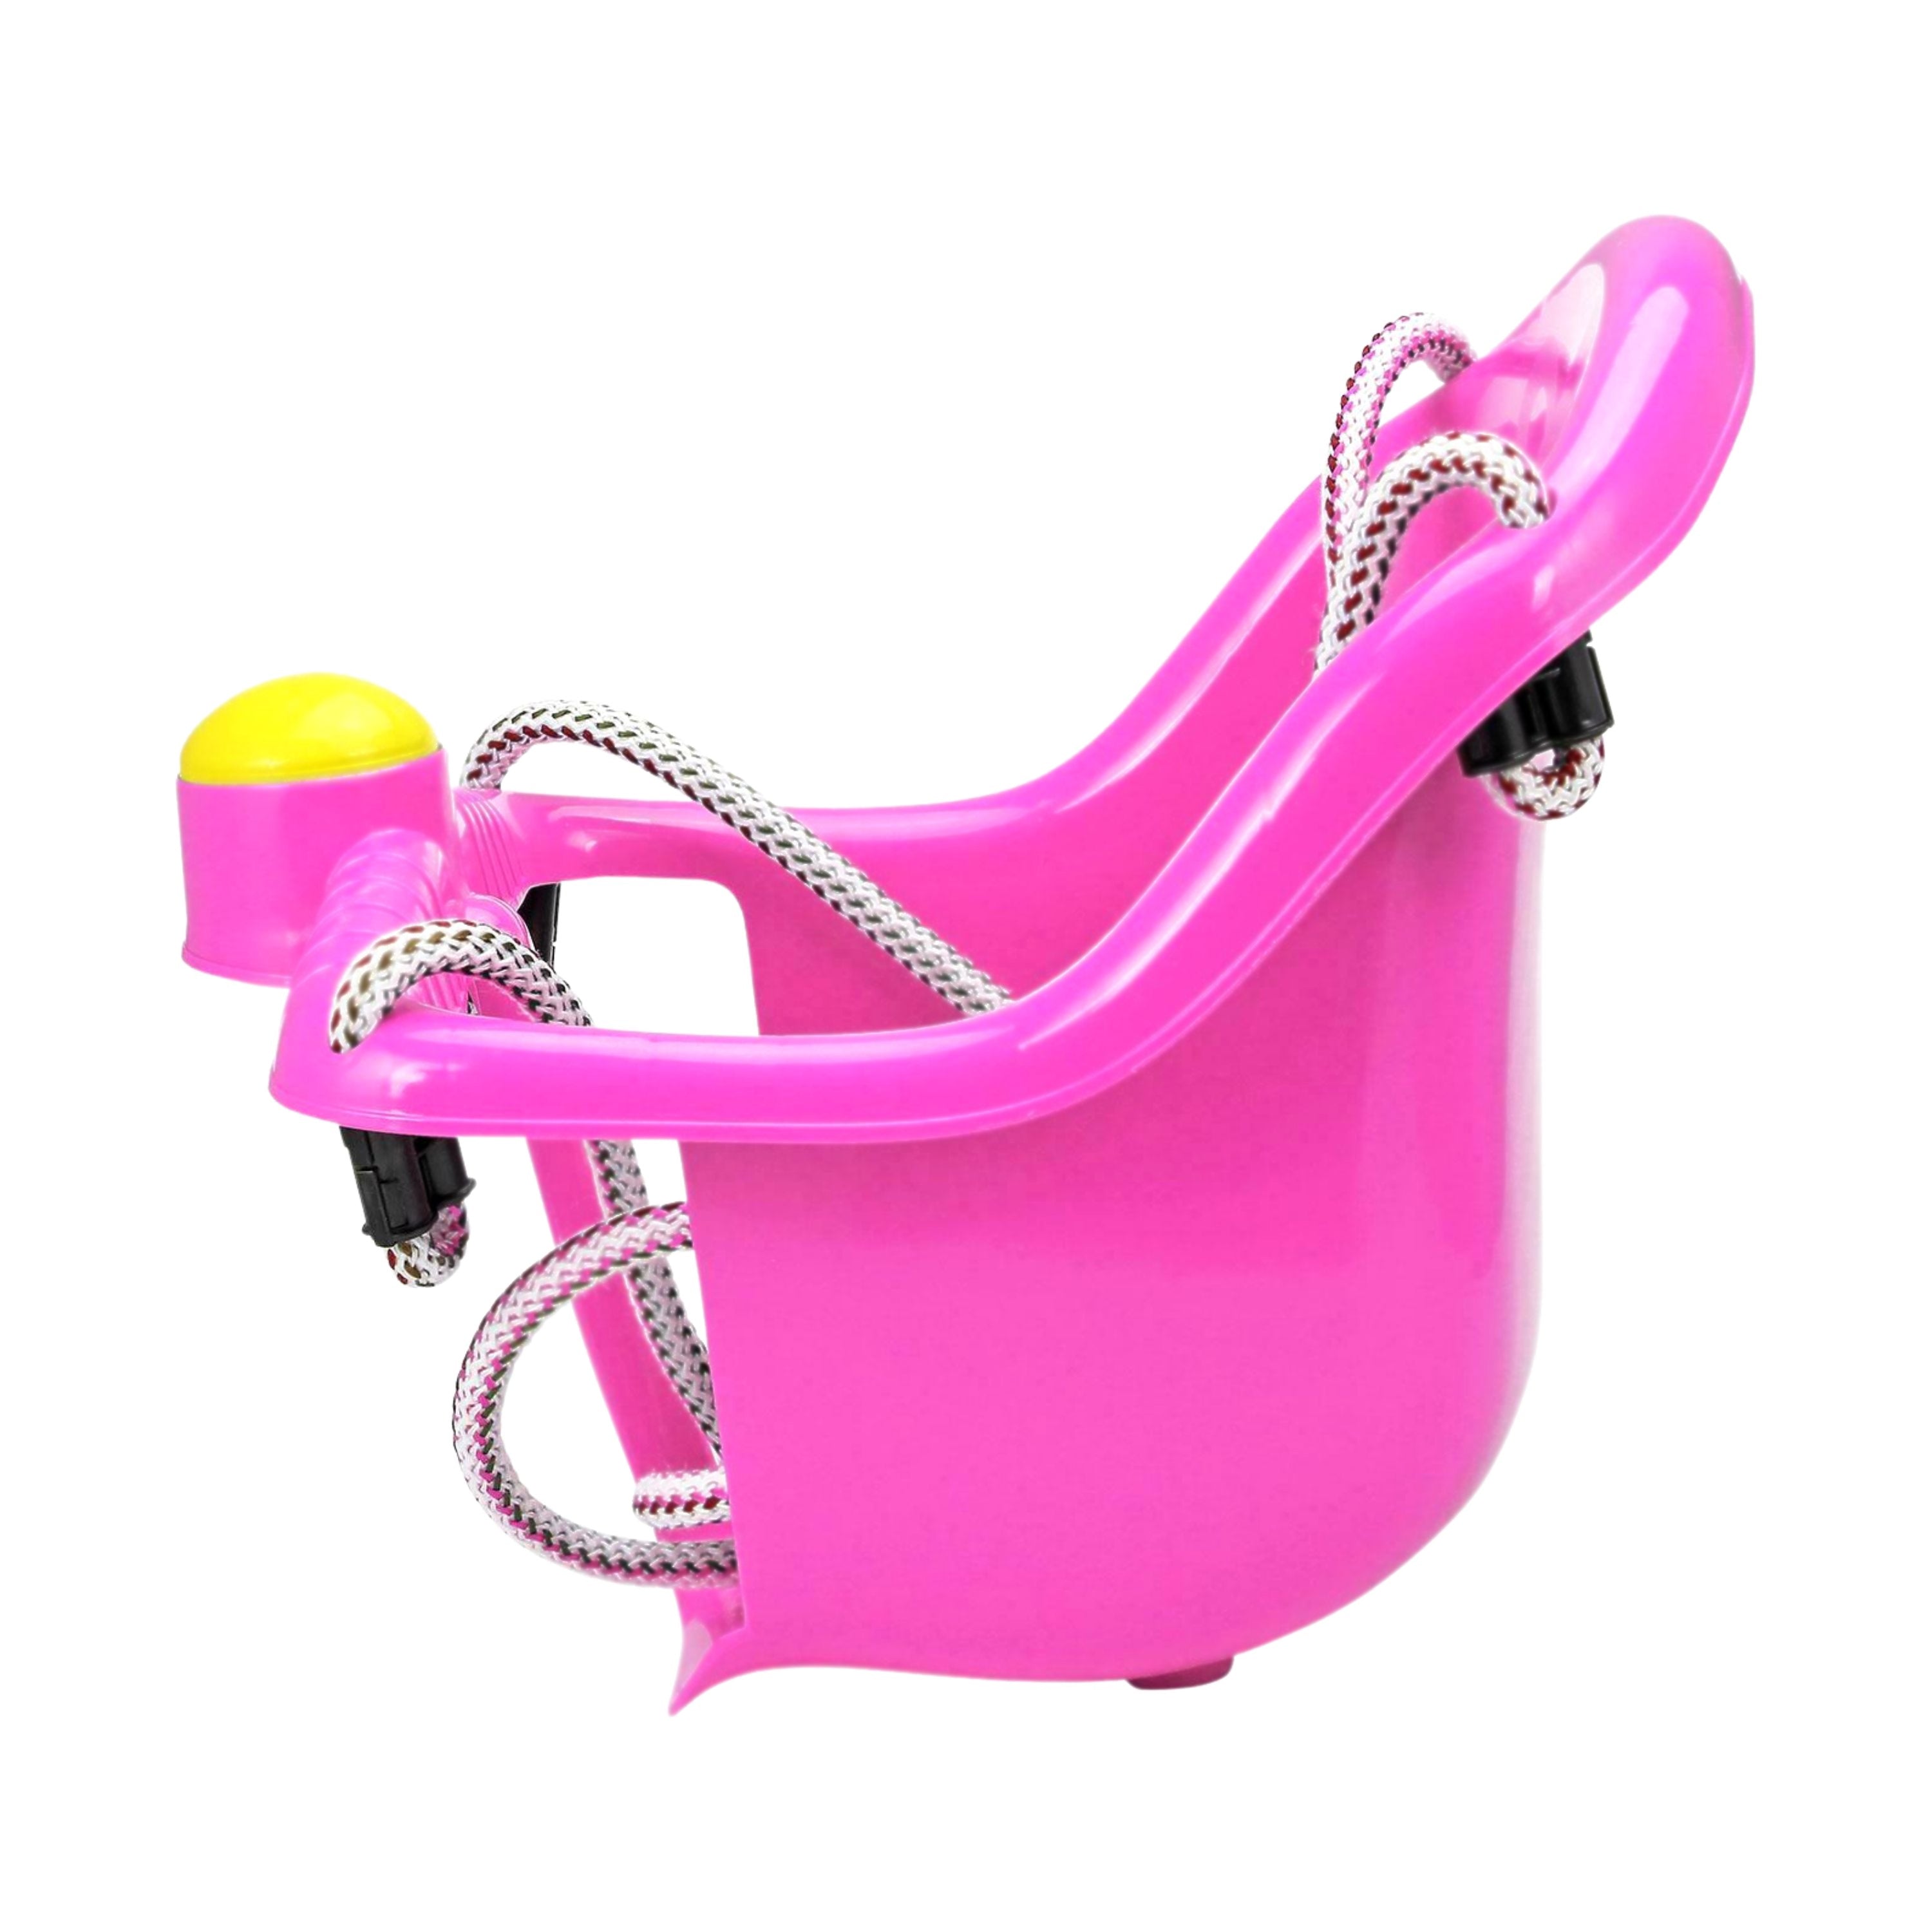 Toddler Safety Safe Swing Seat with Adjustable Garden Rope MTS - The Magic Toy Shop